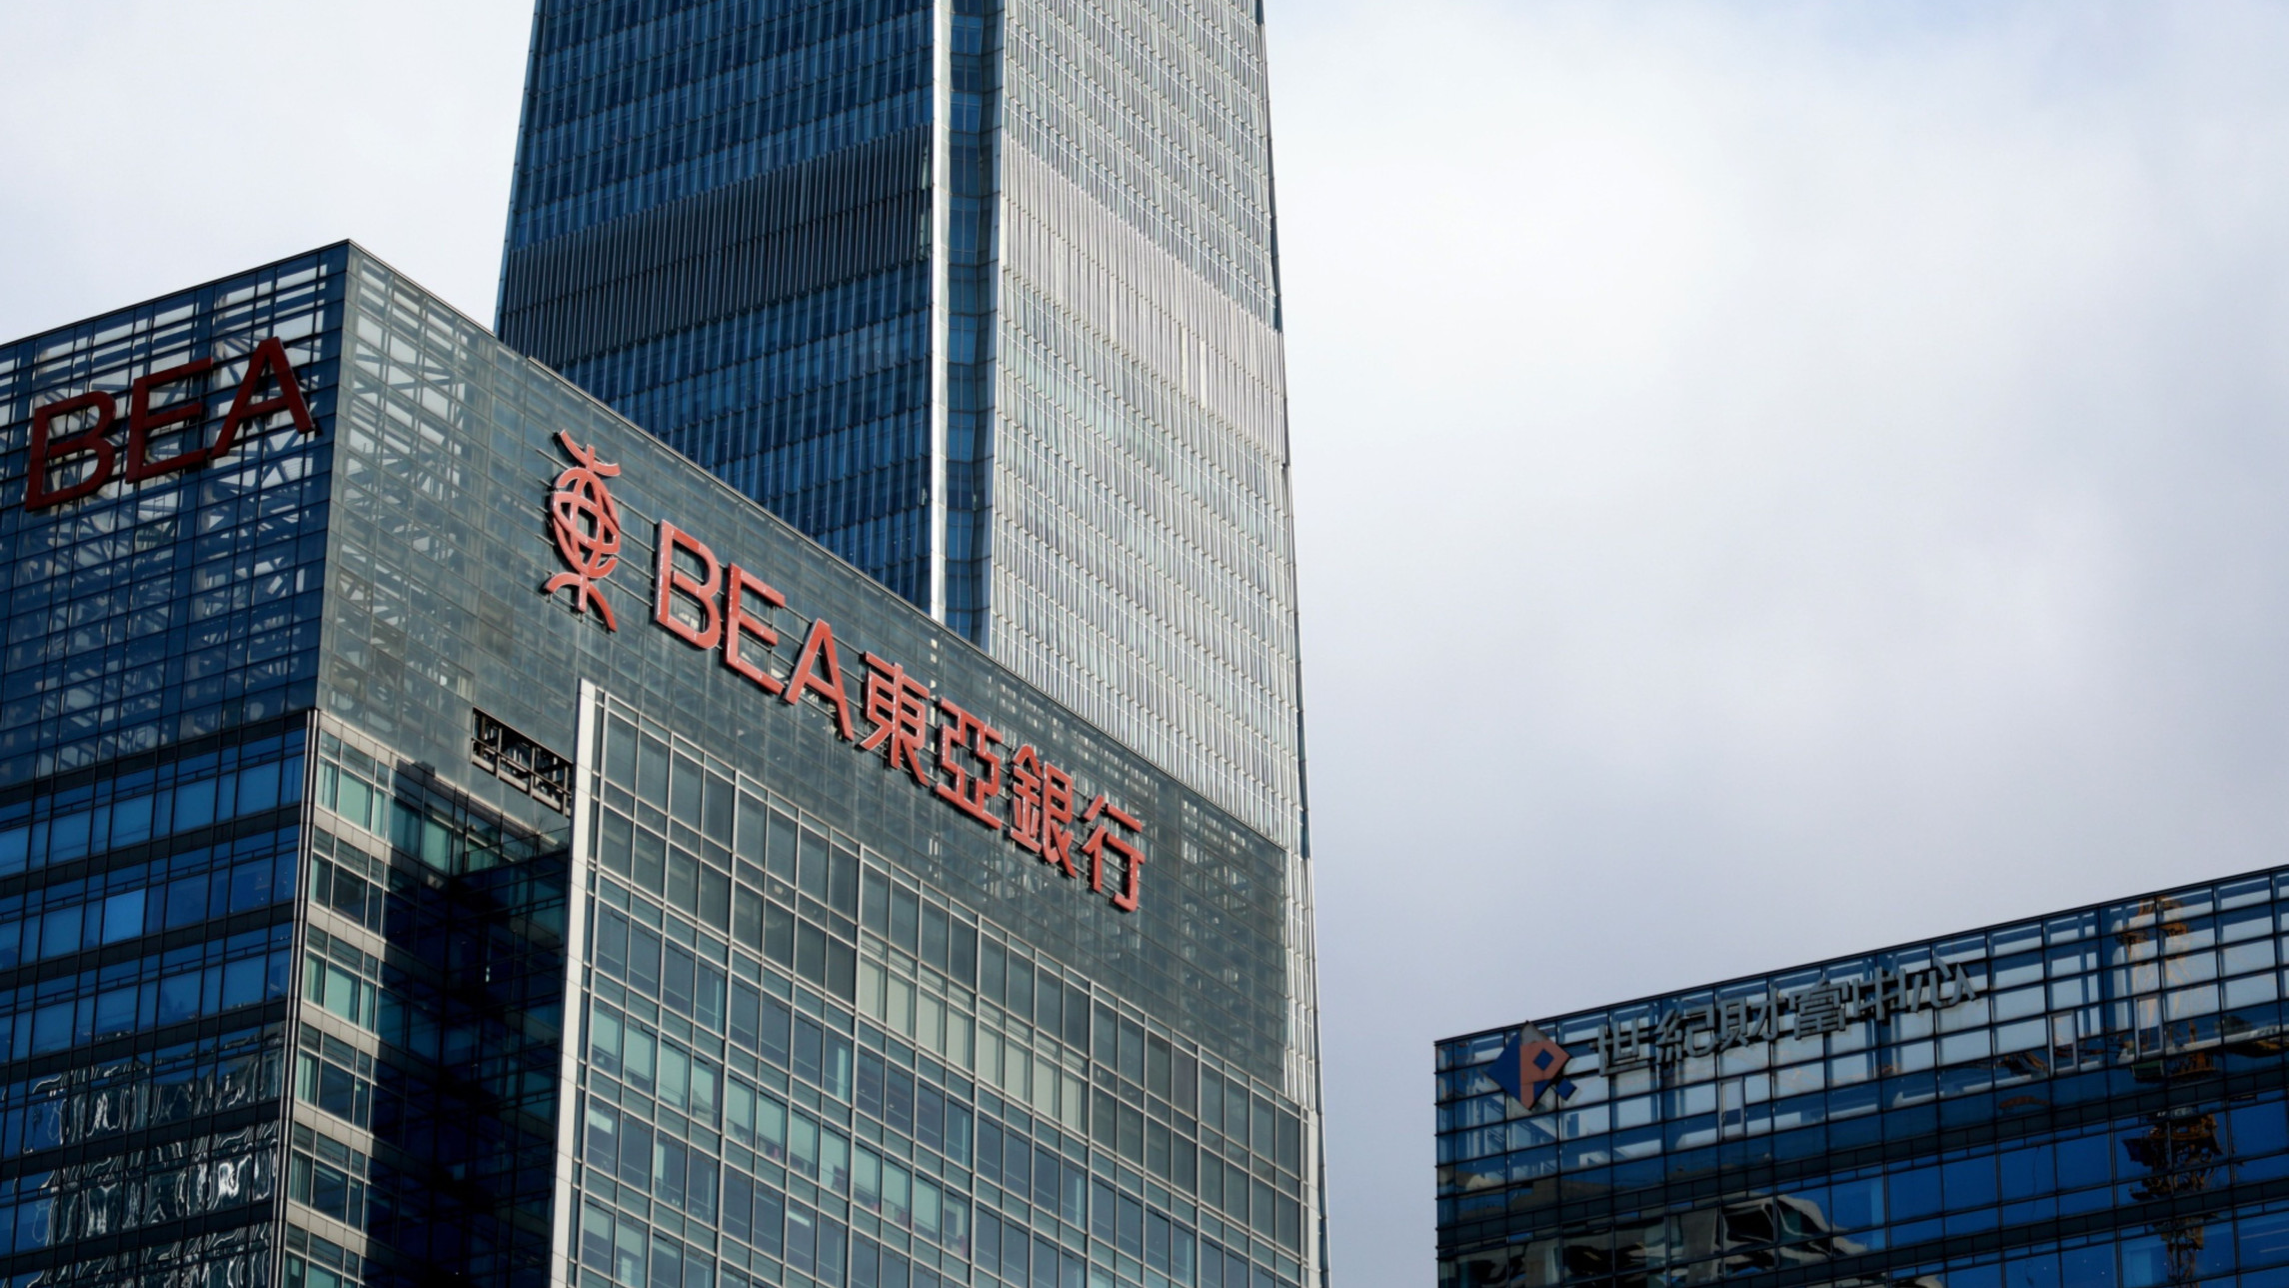 Bank of East Asia downplays concerns over executive's arrest